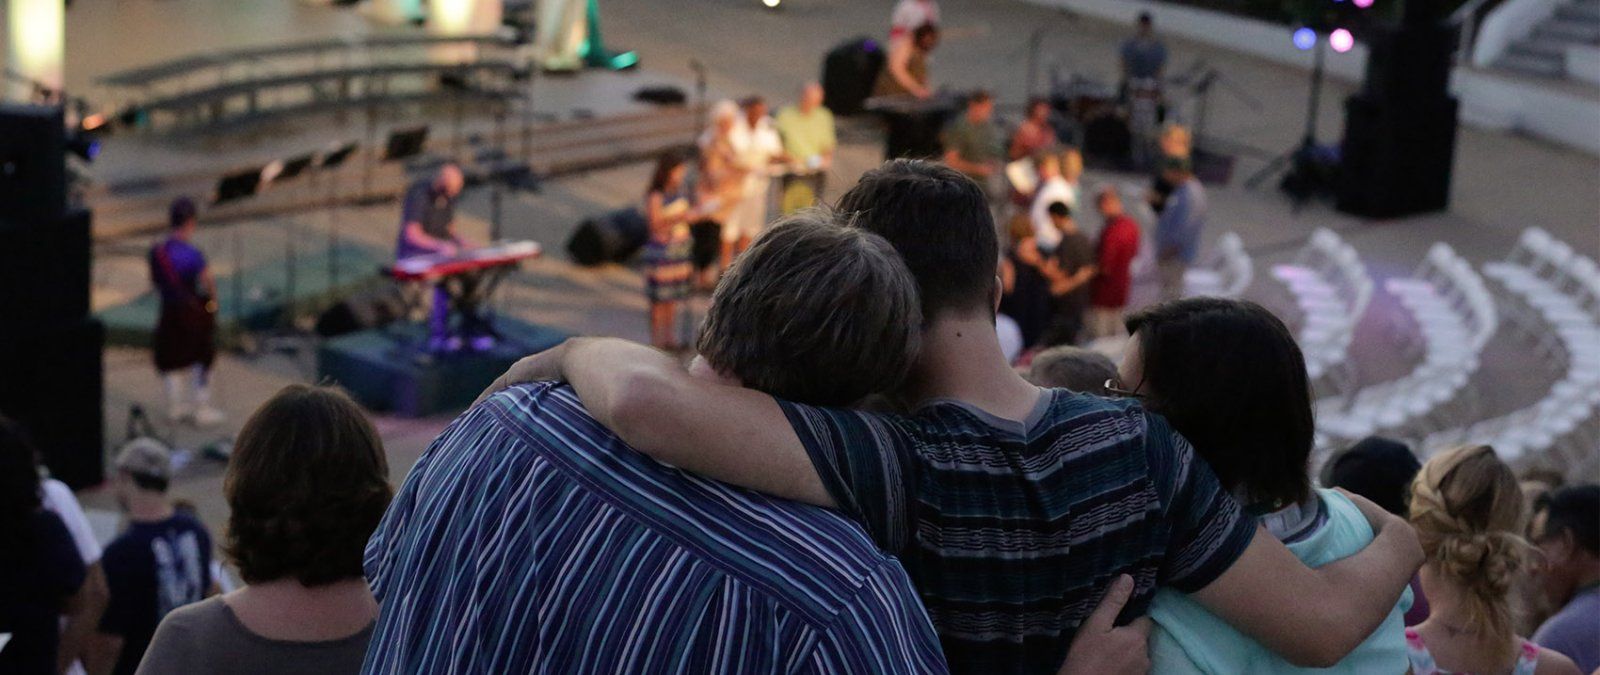 A family worships together in the Greek Amphitheatre during NSO.